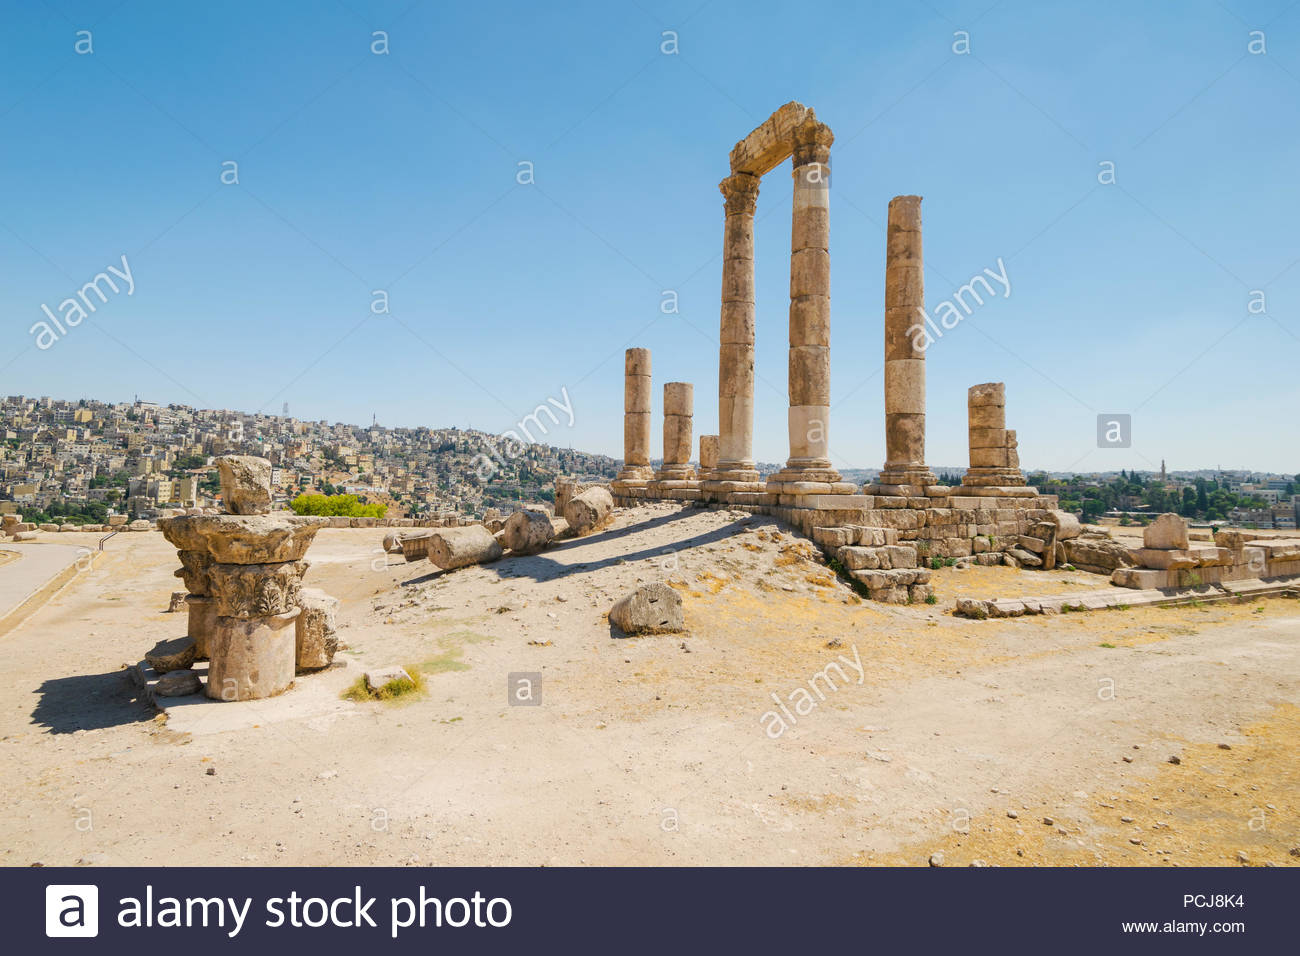 the-ancient-roman-agora-and-temples-on-top-of-a-hill-over-amman-city-jordan-middle-east-PCJ8K4.jpg